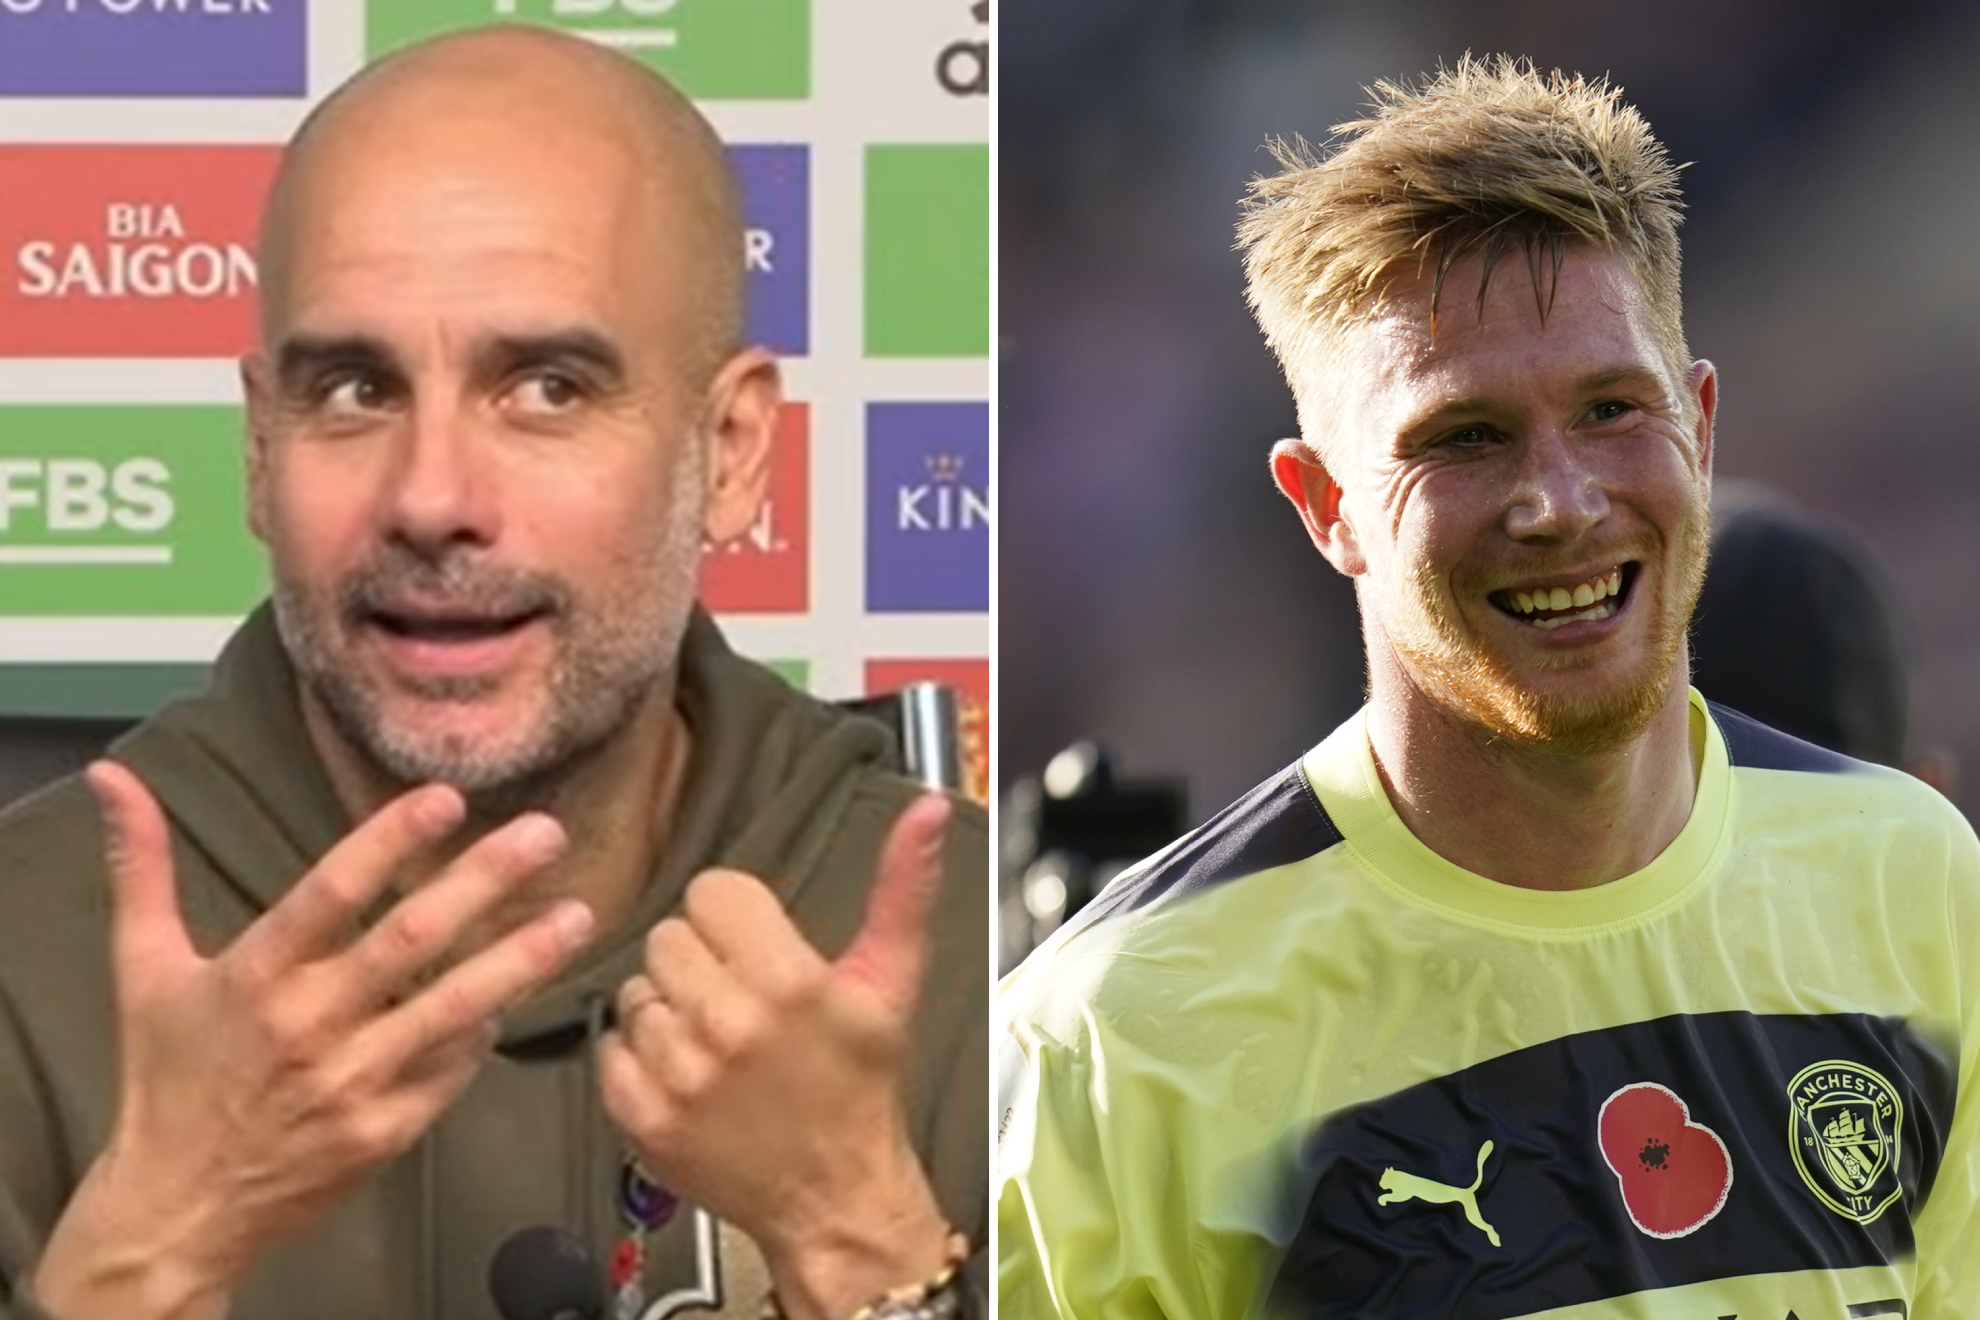 Guardiola: De Bruyne and I have done everything, except sleep together